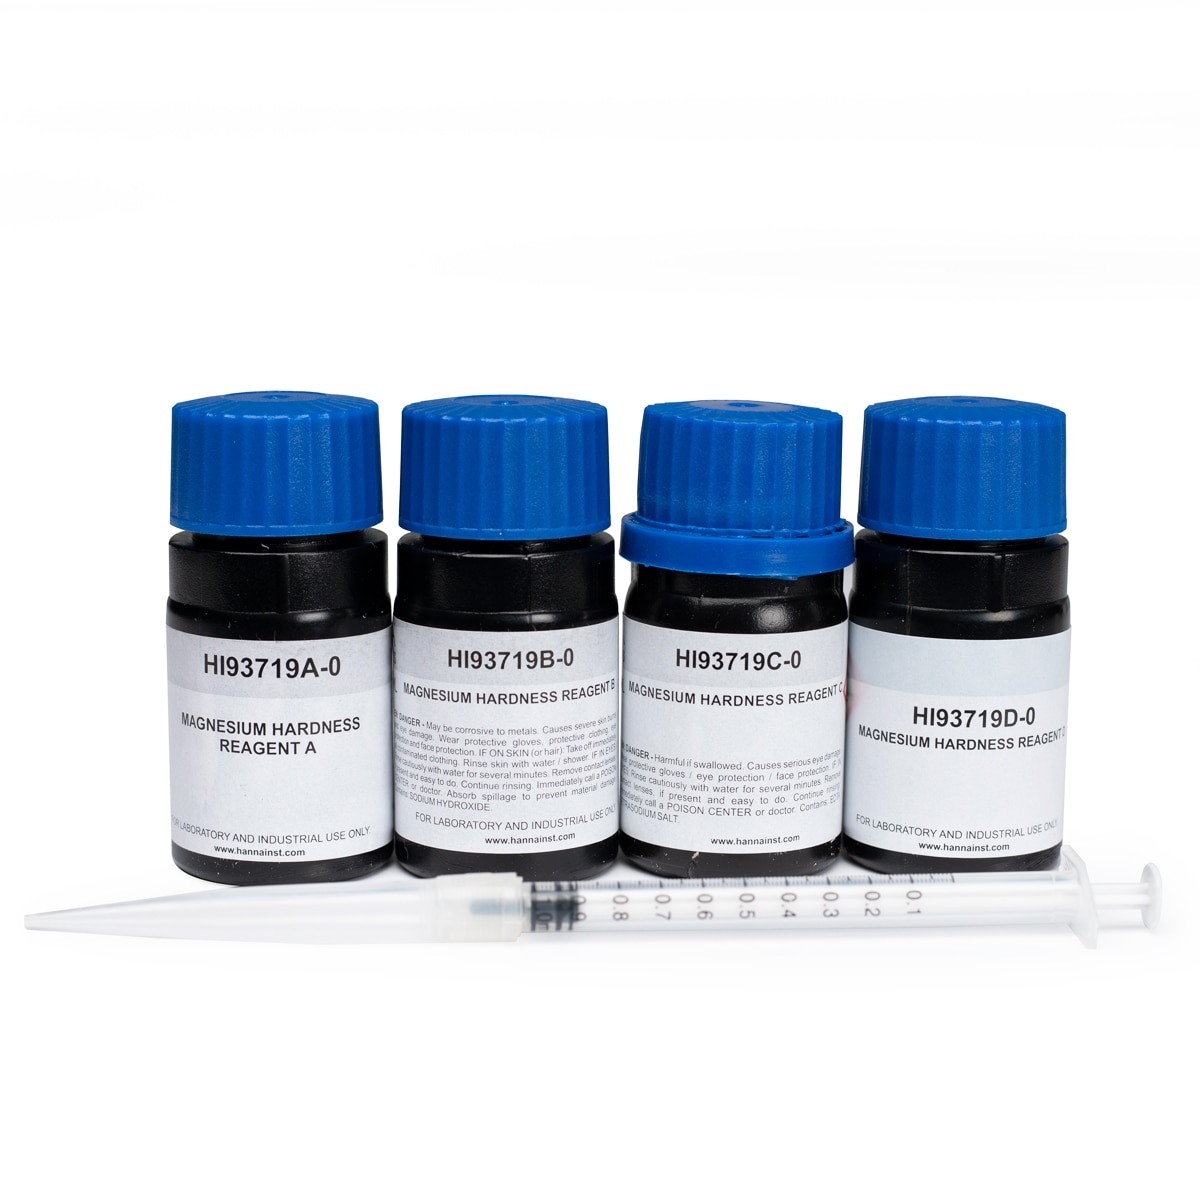 HI93719-01 Magnesium and Total Hardness Reagents (100 tests)